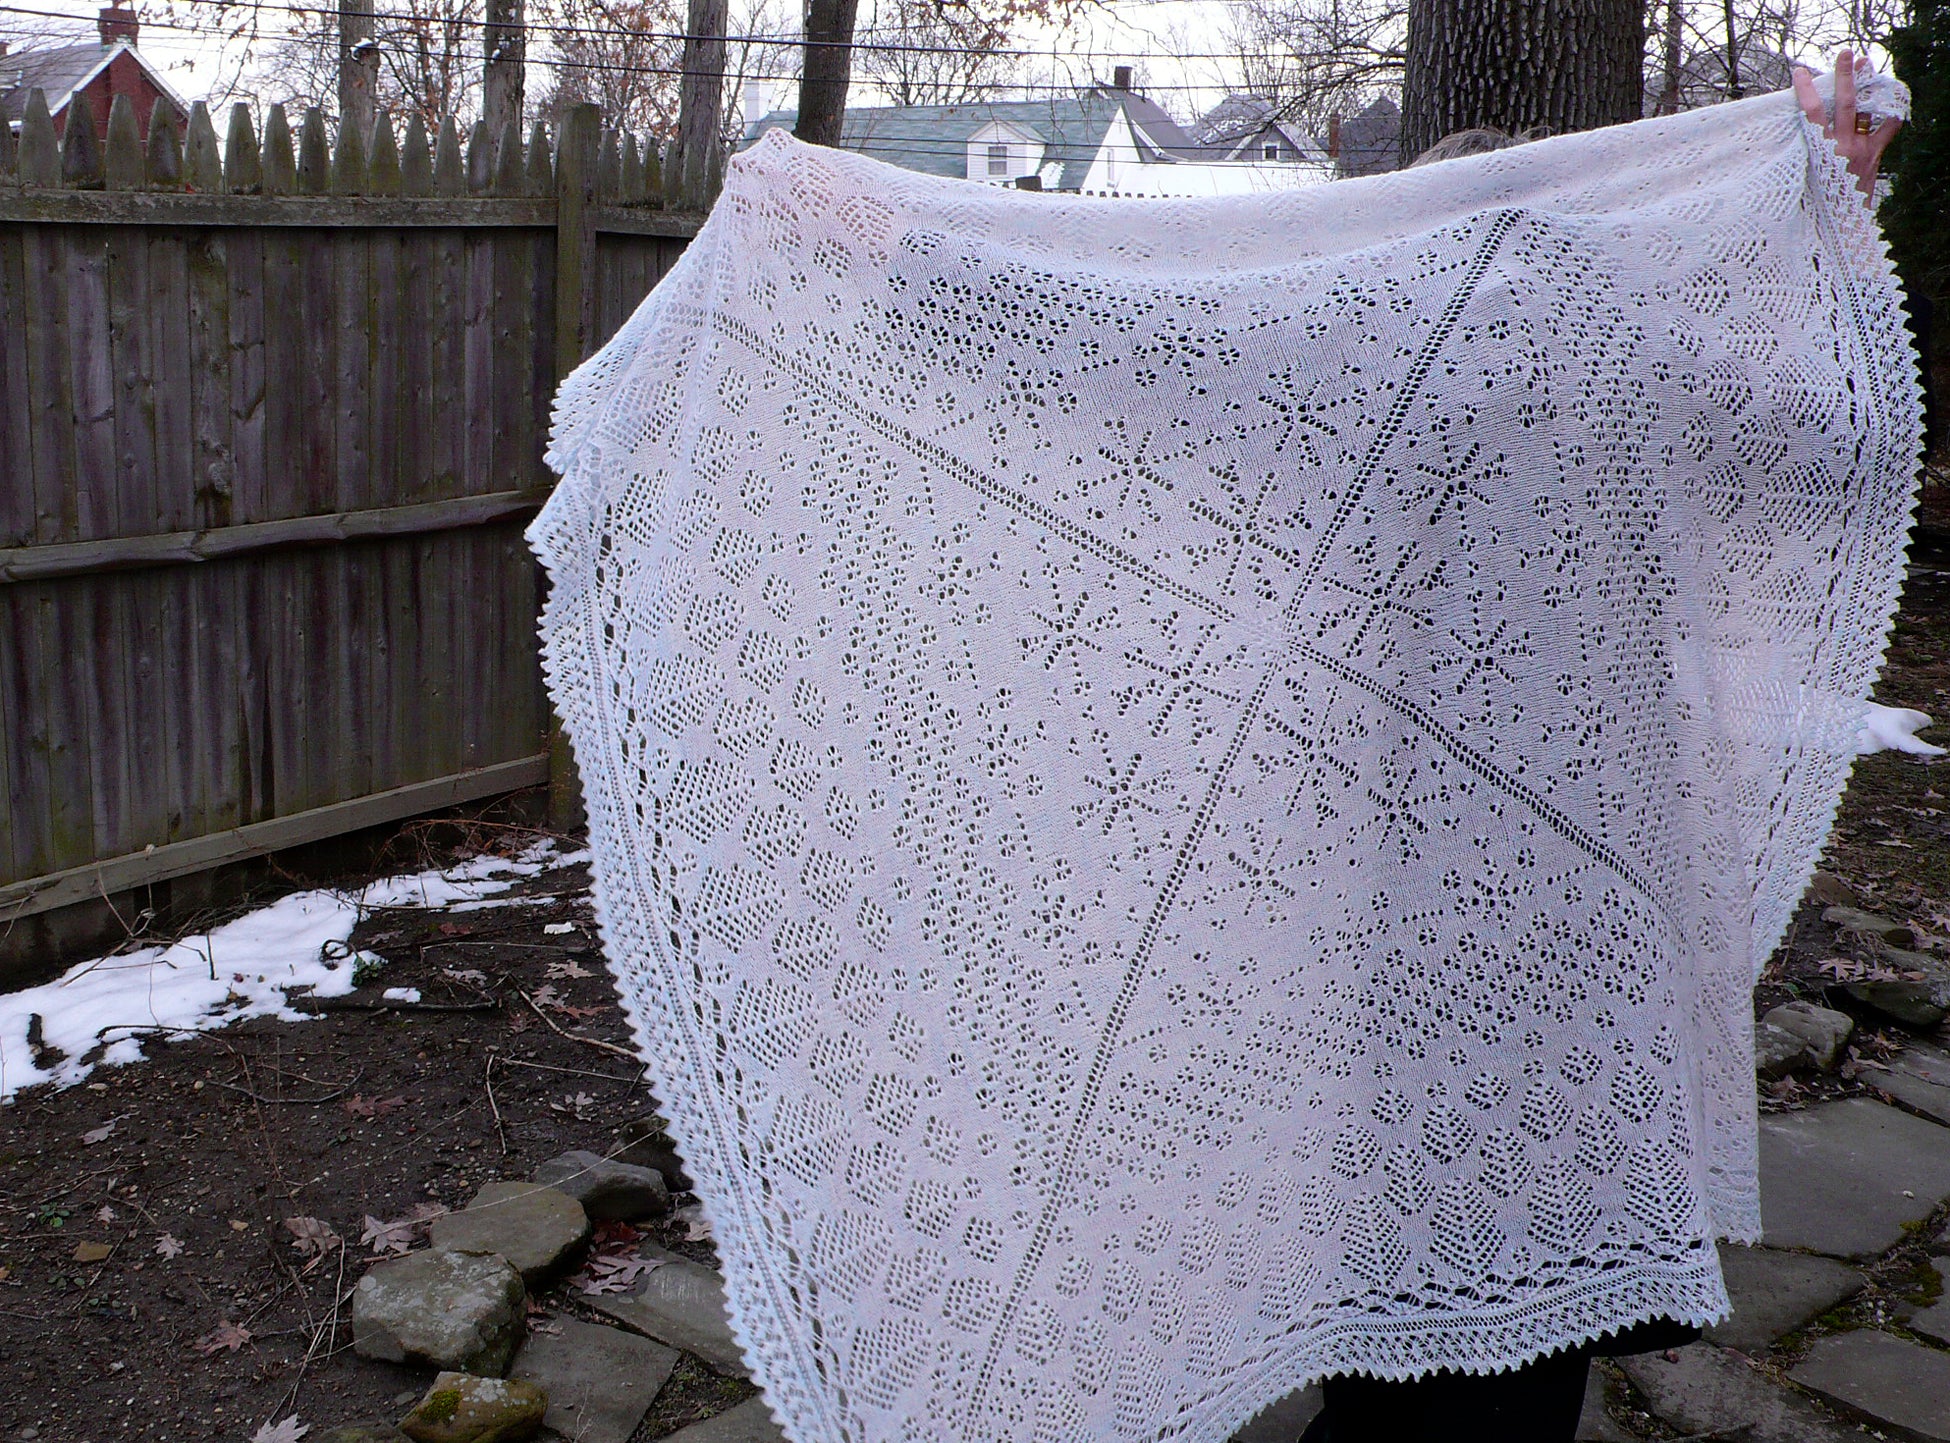 Snowflakes in Cedarwoods Lace Shawl